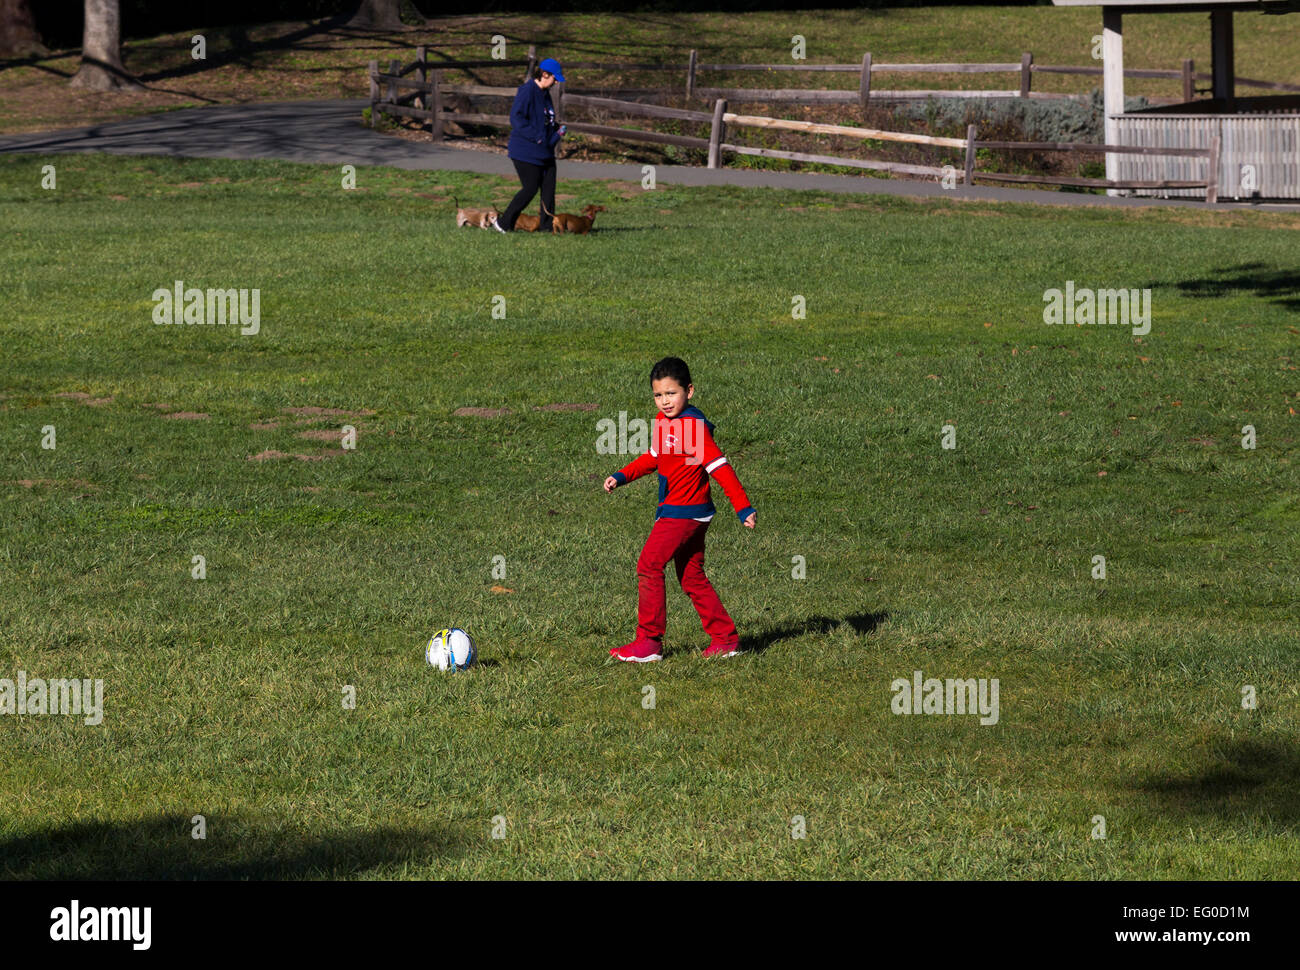 young Hispanic boy learning to play soccer by kicking soccer ball while playing soccer in Pioneer Park in the city of Novato California Stock Photo